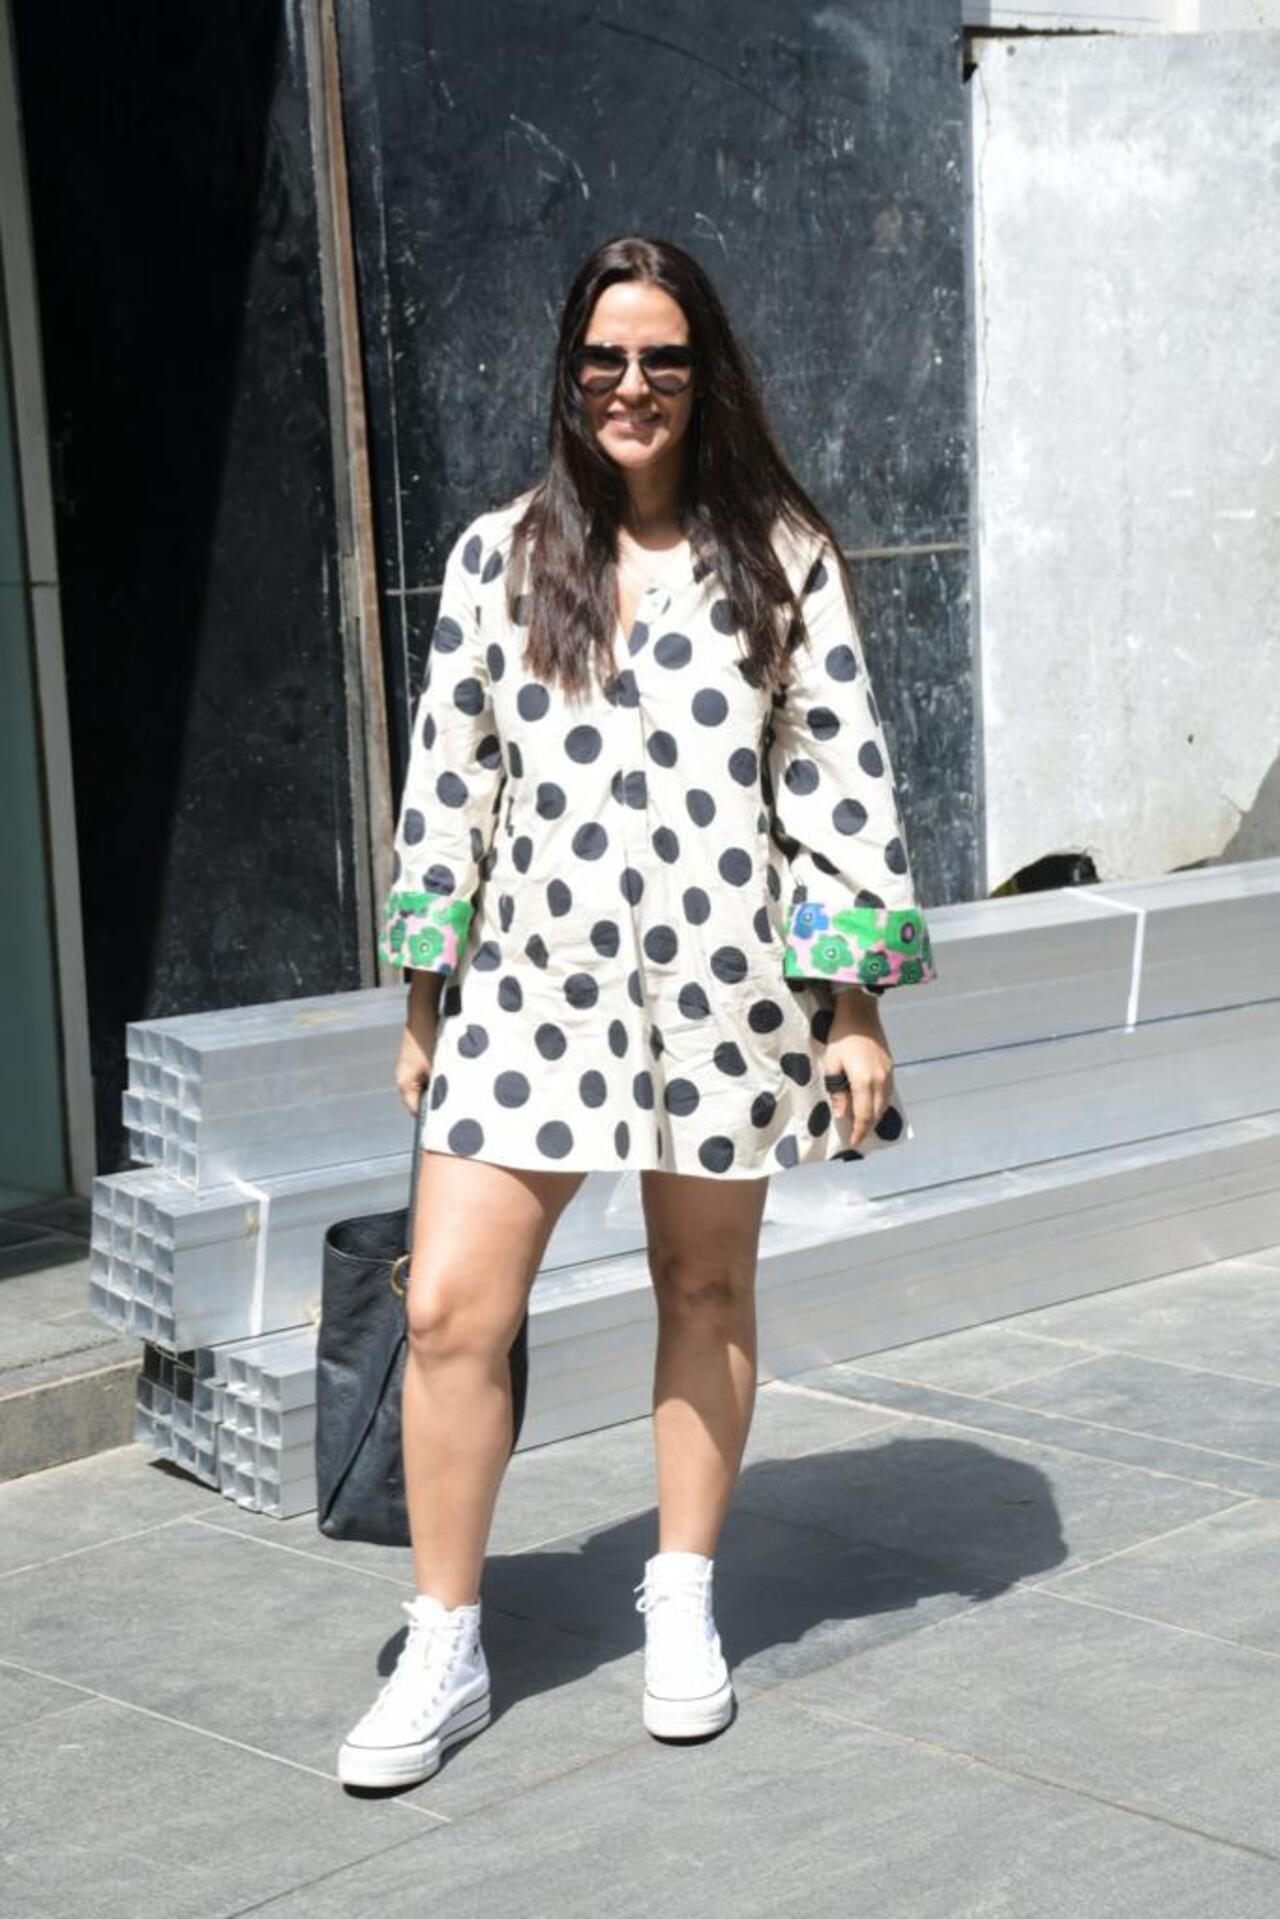 Neha Dhupia made an appearance in the city. The actress looked lovely in a white and black polka dress